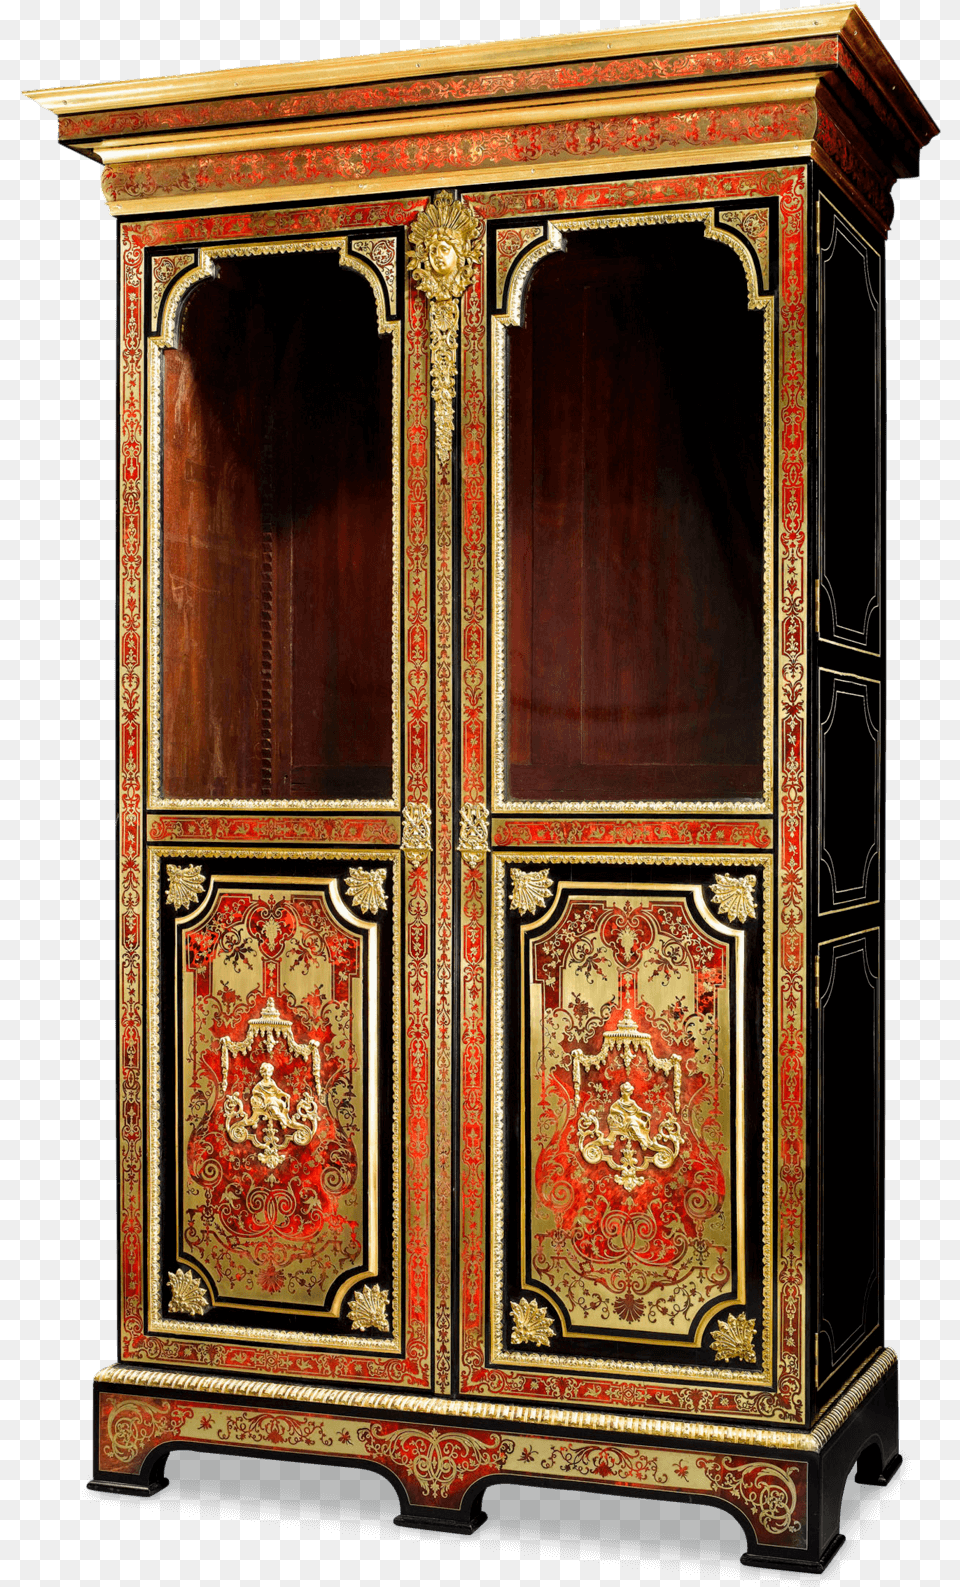 Stamped Boulle Cabinet By Nicolas Sageot Andr Charles Boulle, Closet, Cupboard, Furniture Png Image